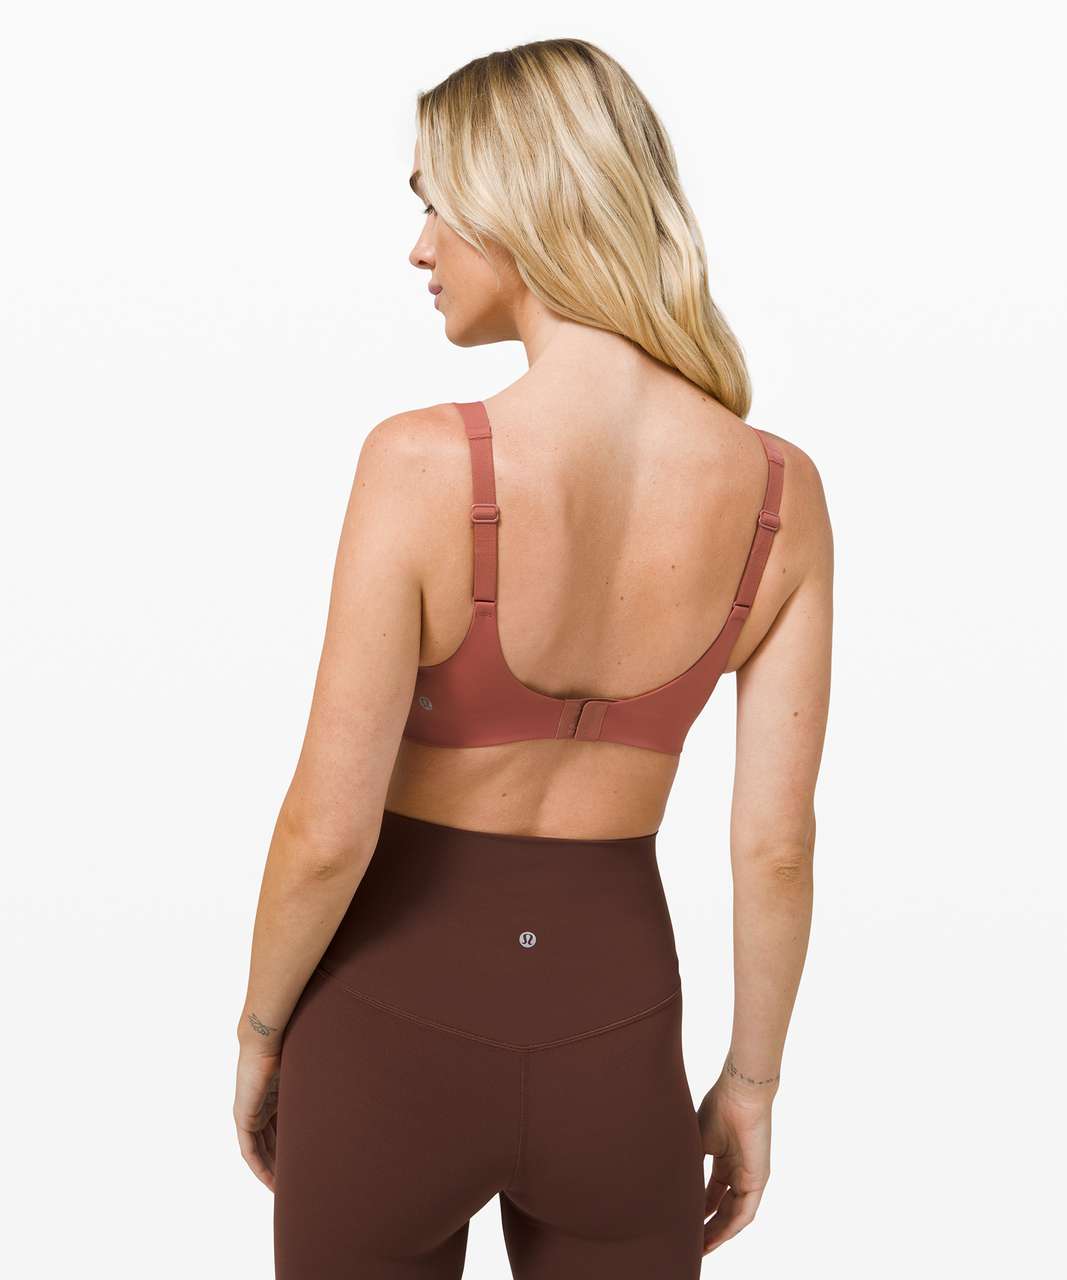 Lululemon In Alignment Straight Strap Bra *Light Support, A/B Cup - Soft Cranberry